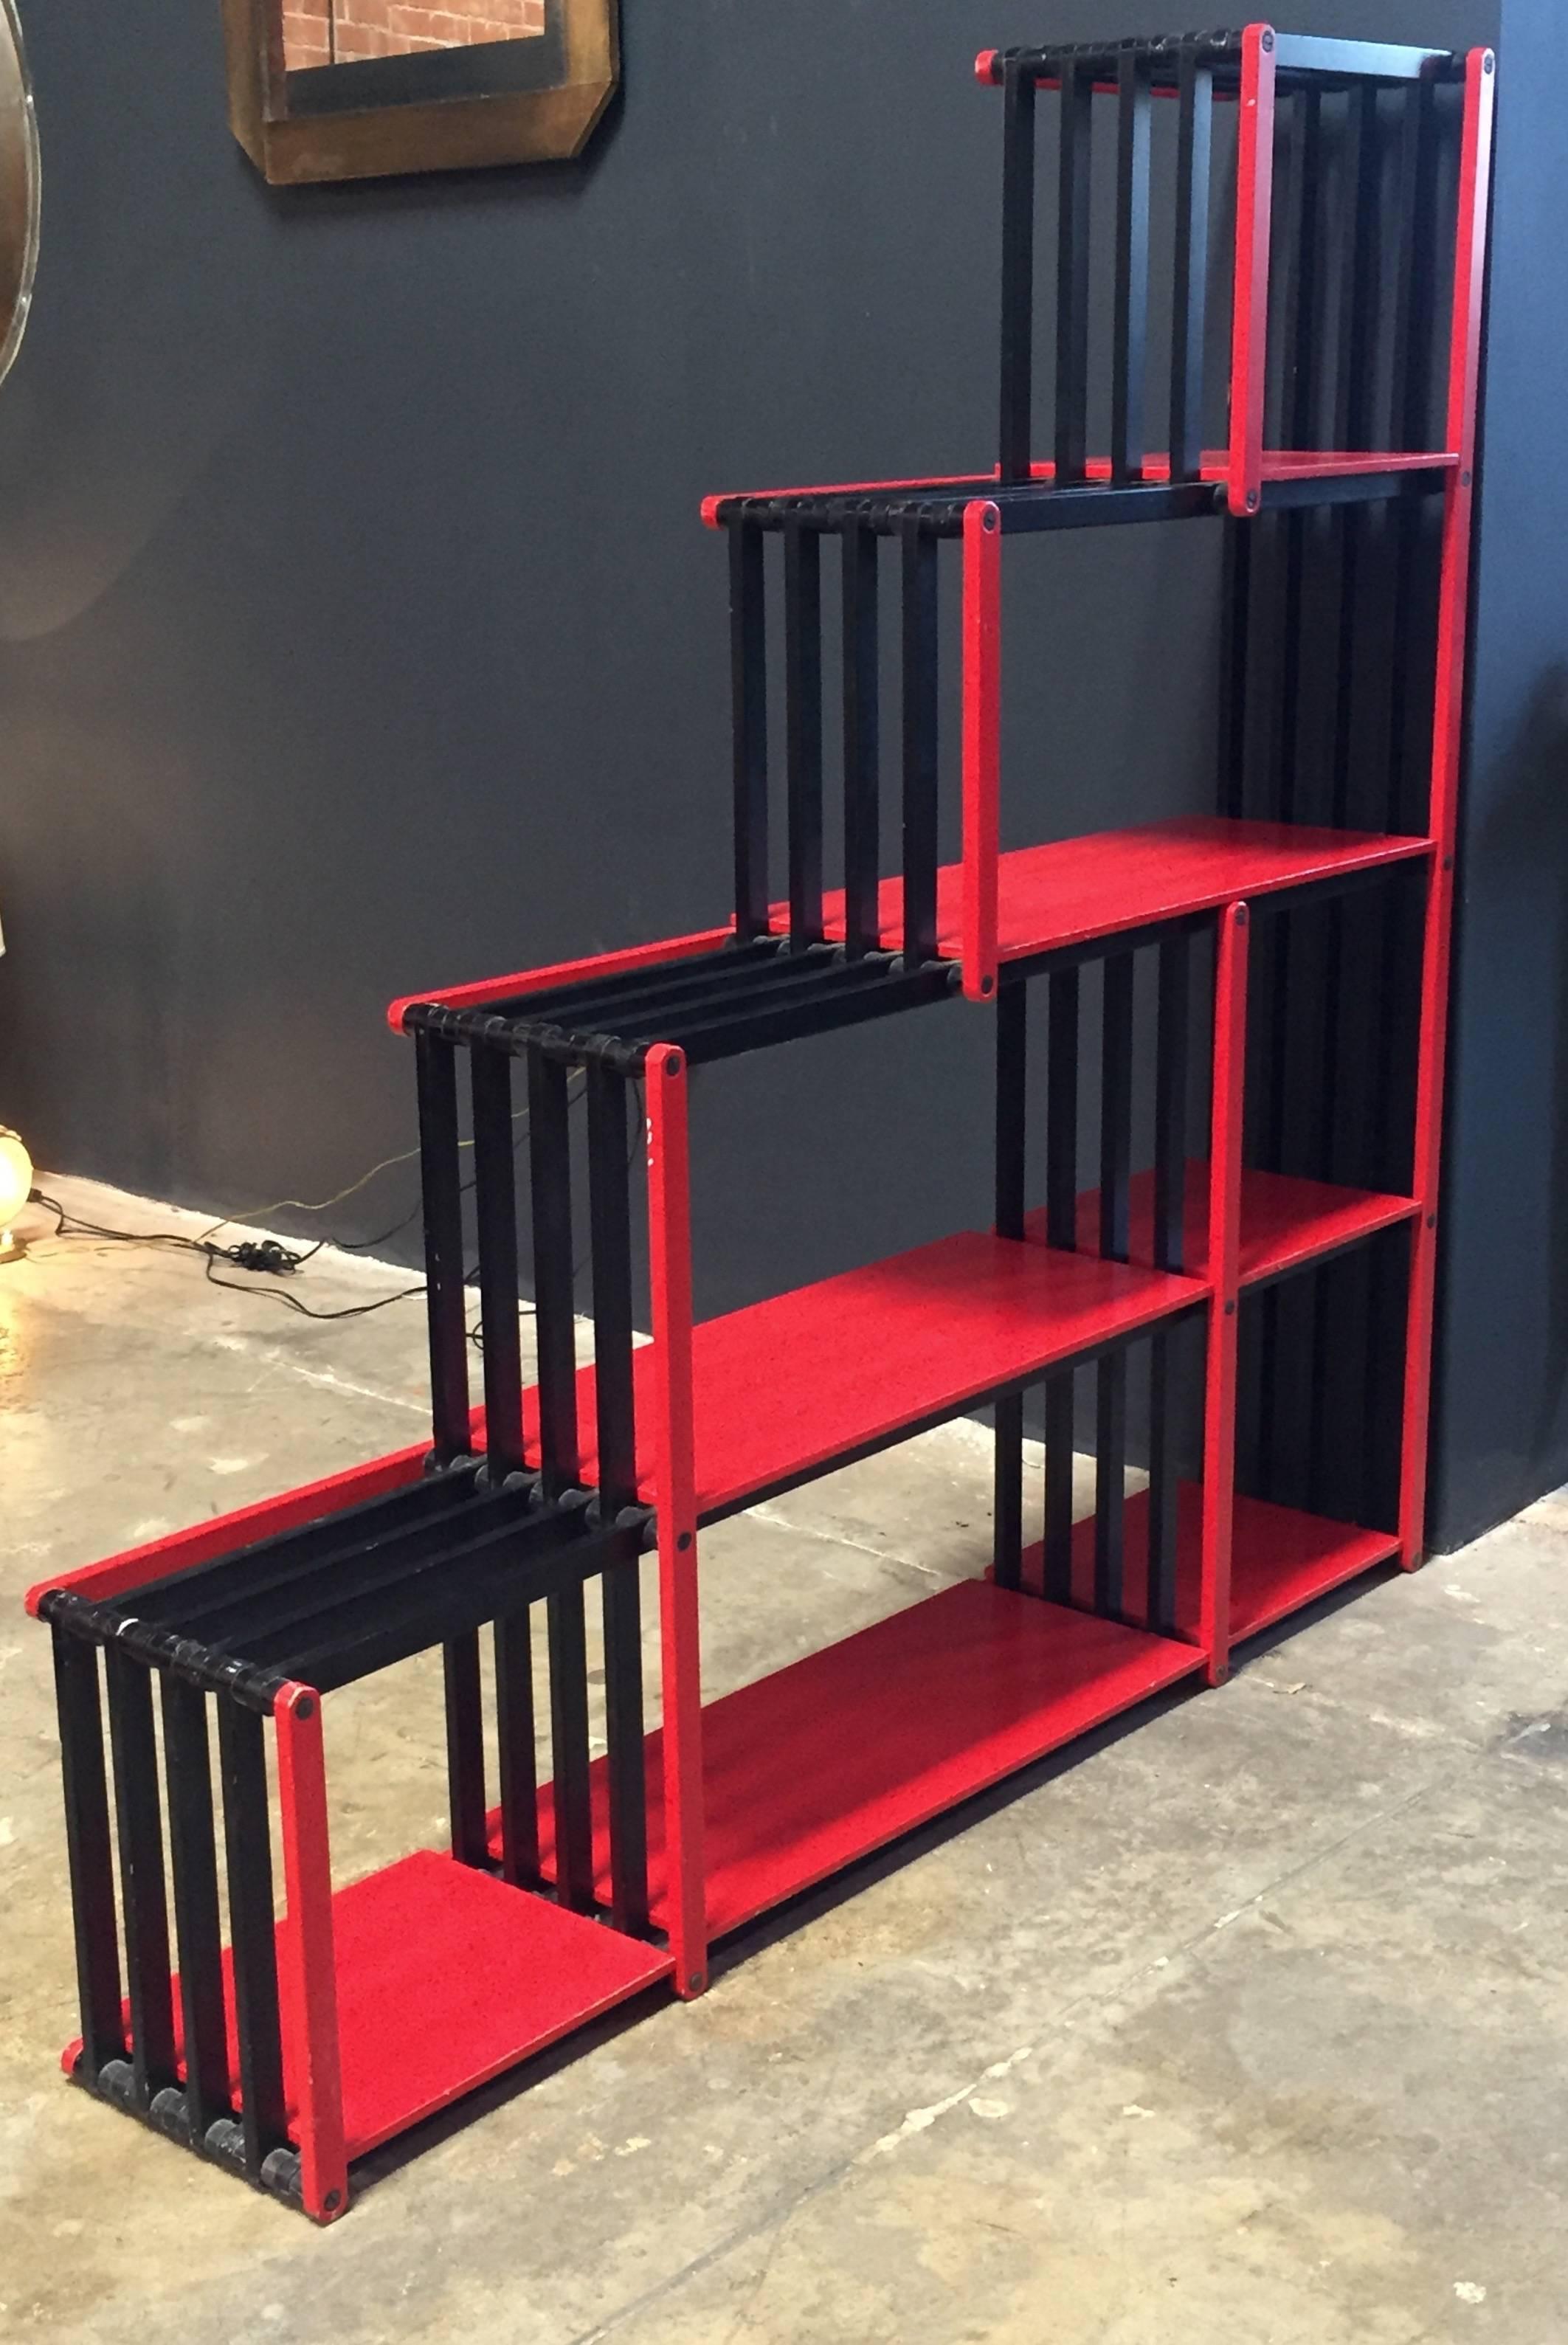 Flexible wood bookcase, Italy, 1980s
Structure lacquered in black and shelves in red.
It bends whatever you want it to hold your books, objects and treasures.